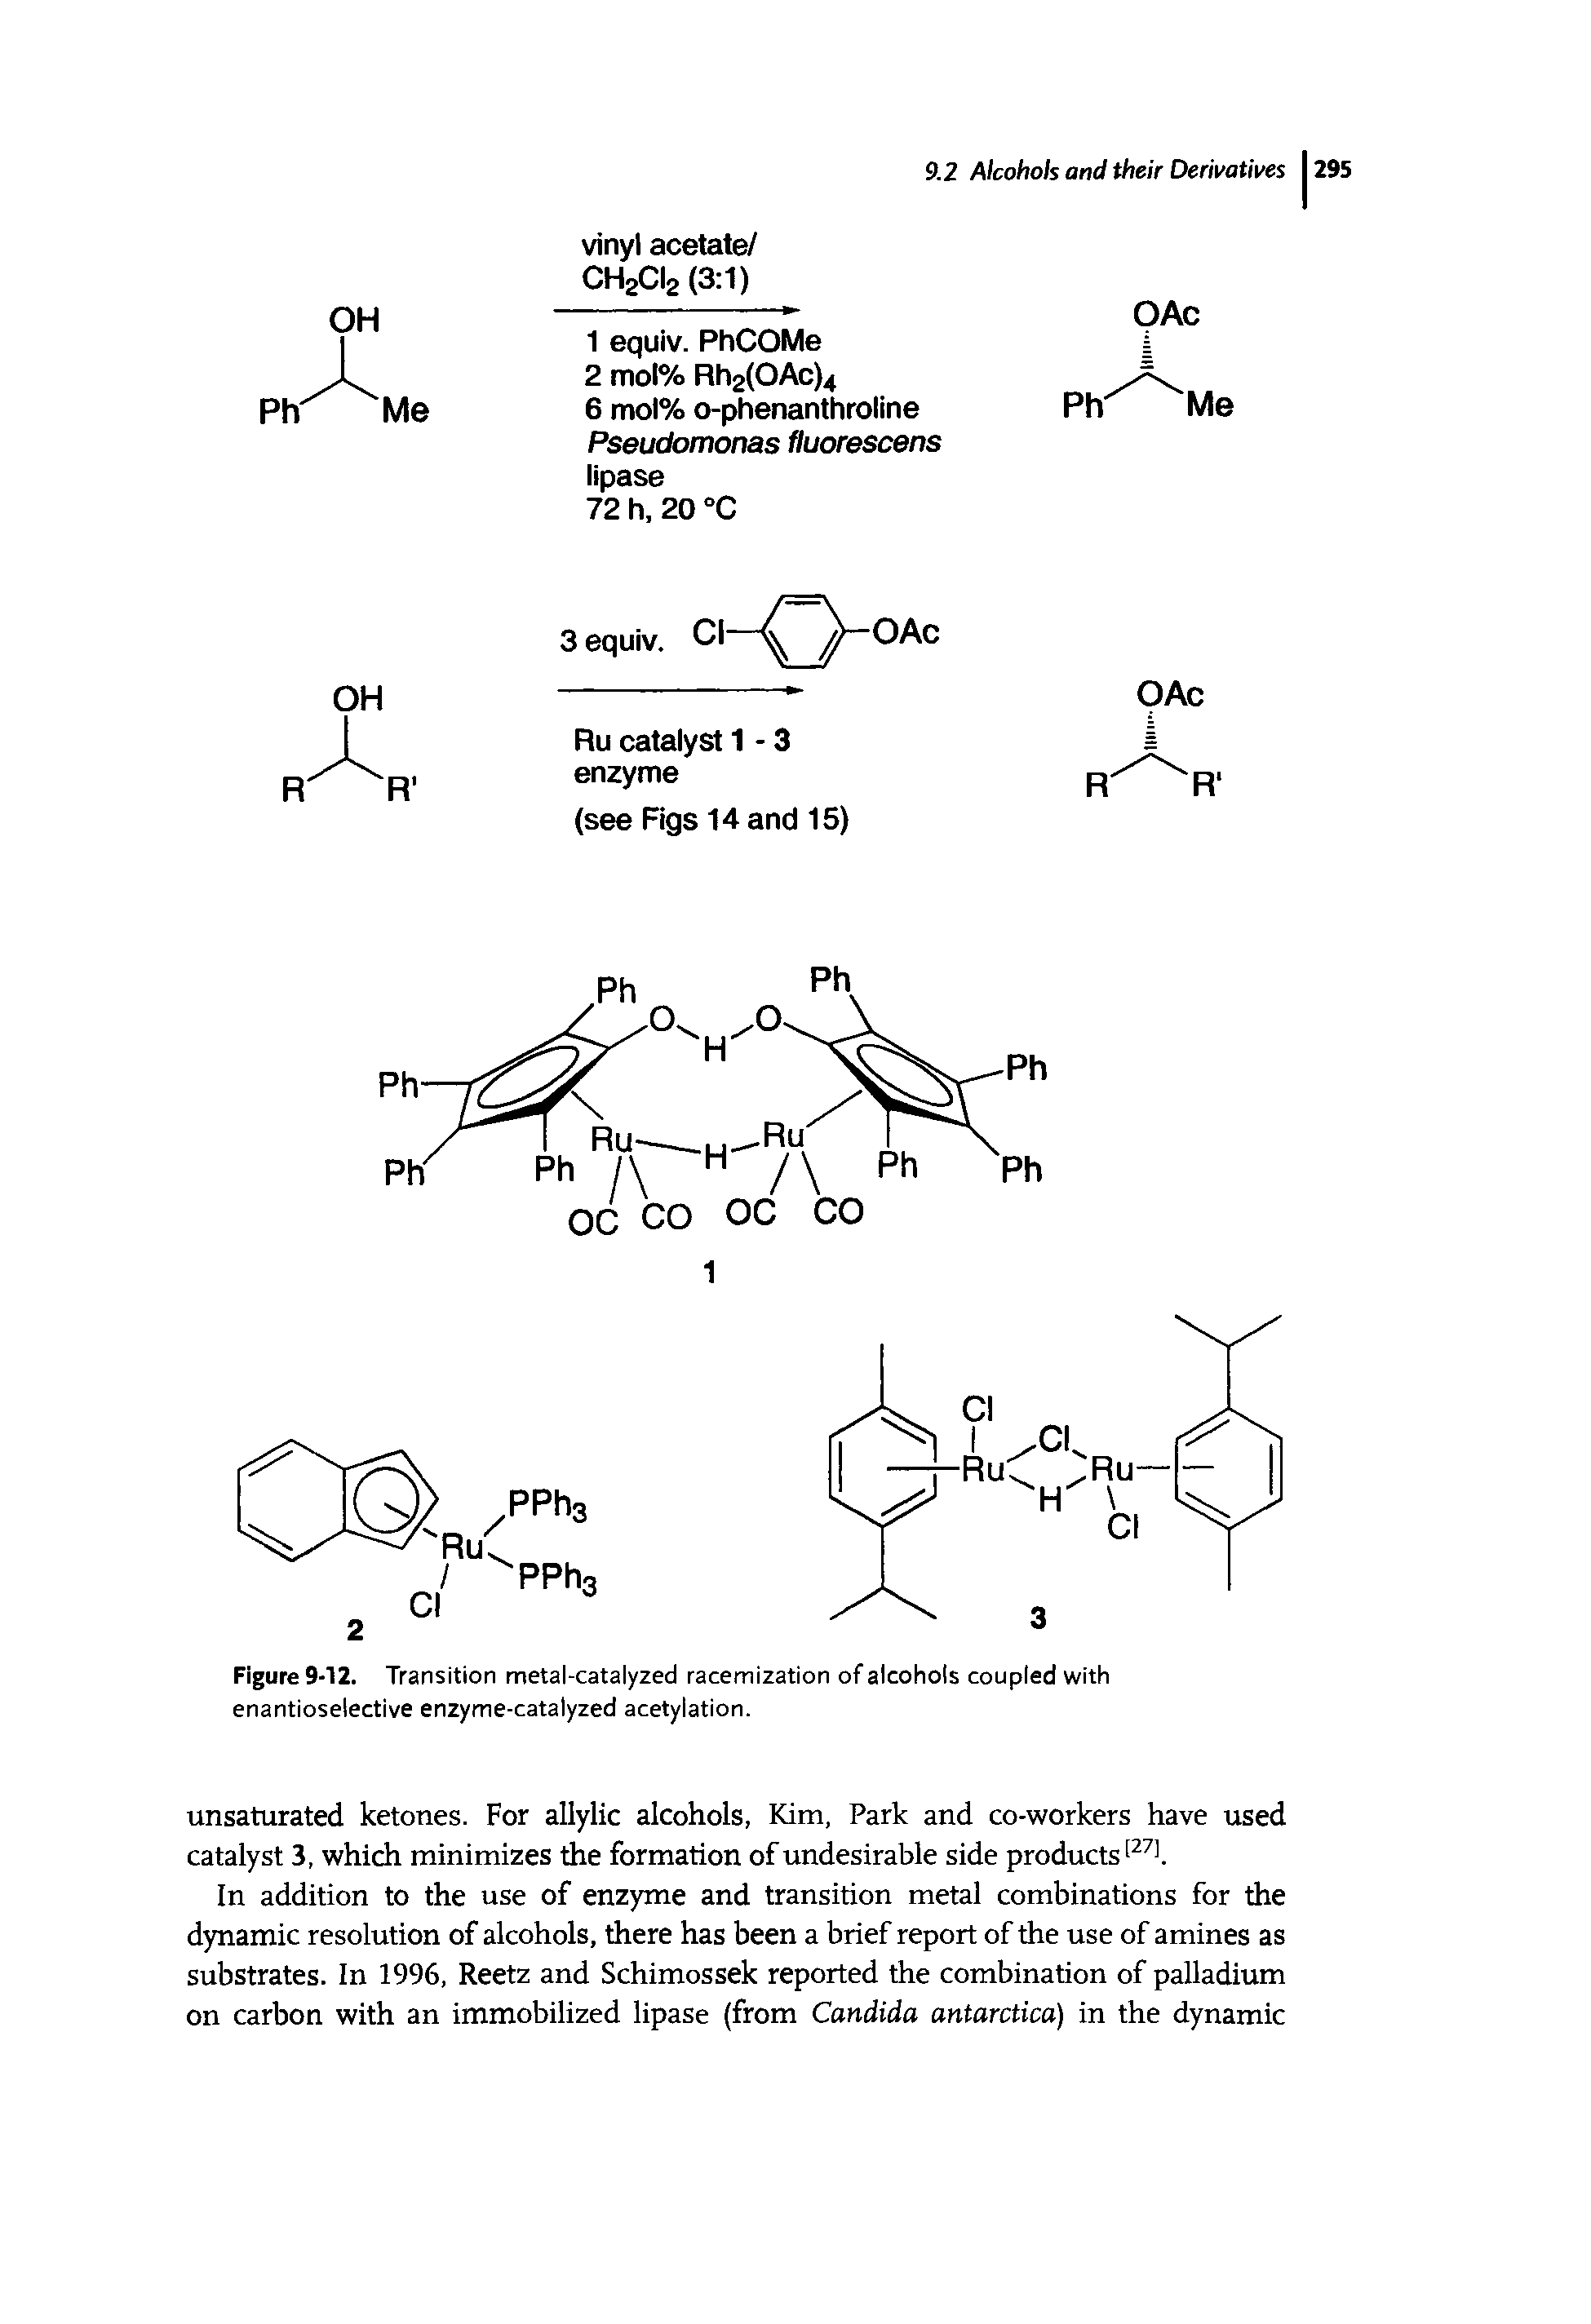 Figure 9-12. Transition metal-catalyzed racemization of alcohols coupled with enantioselective enzyme-catalyzed acetylation.